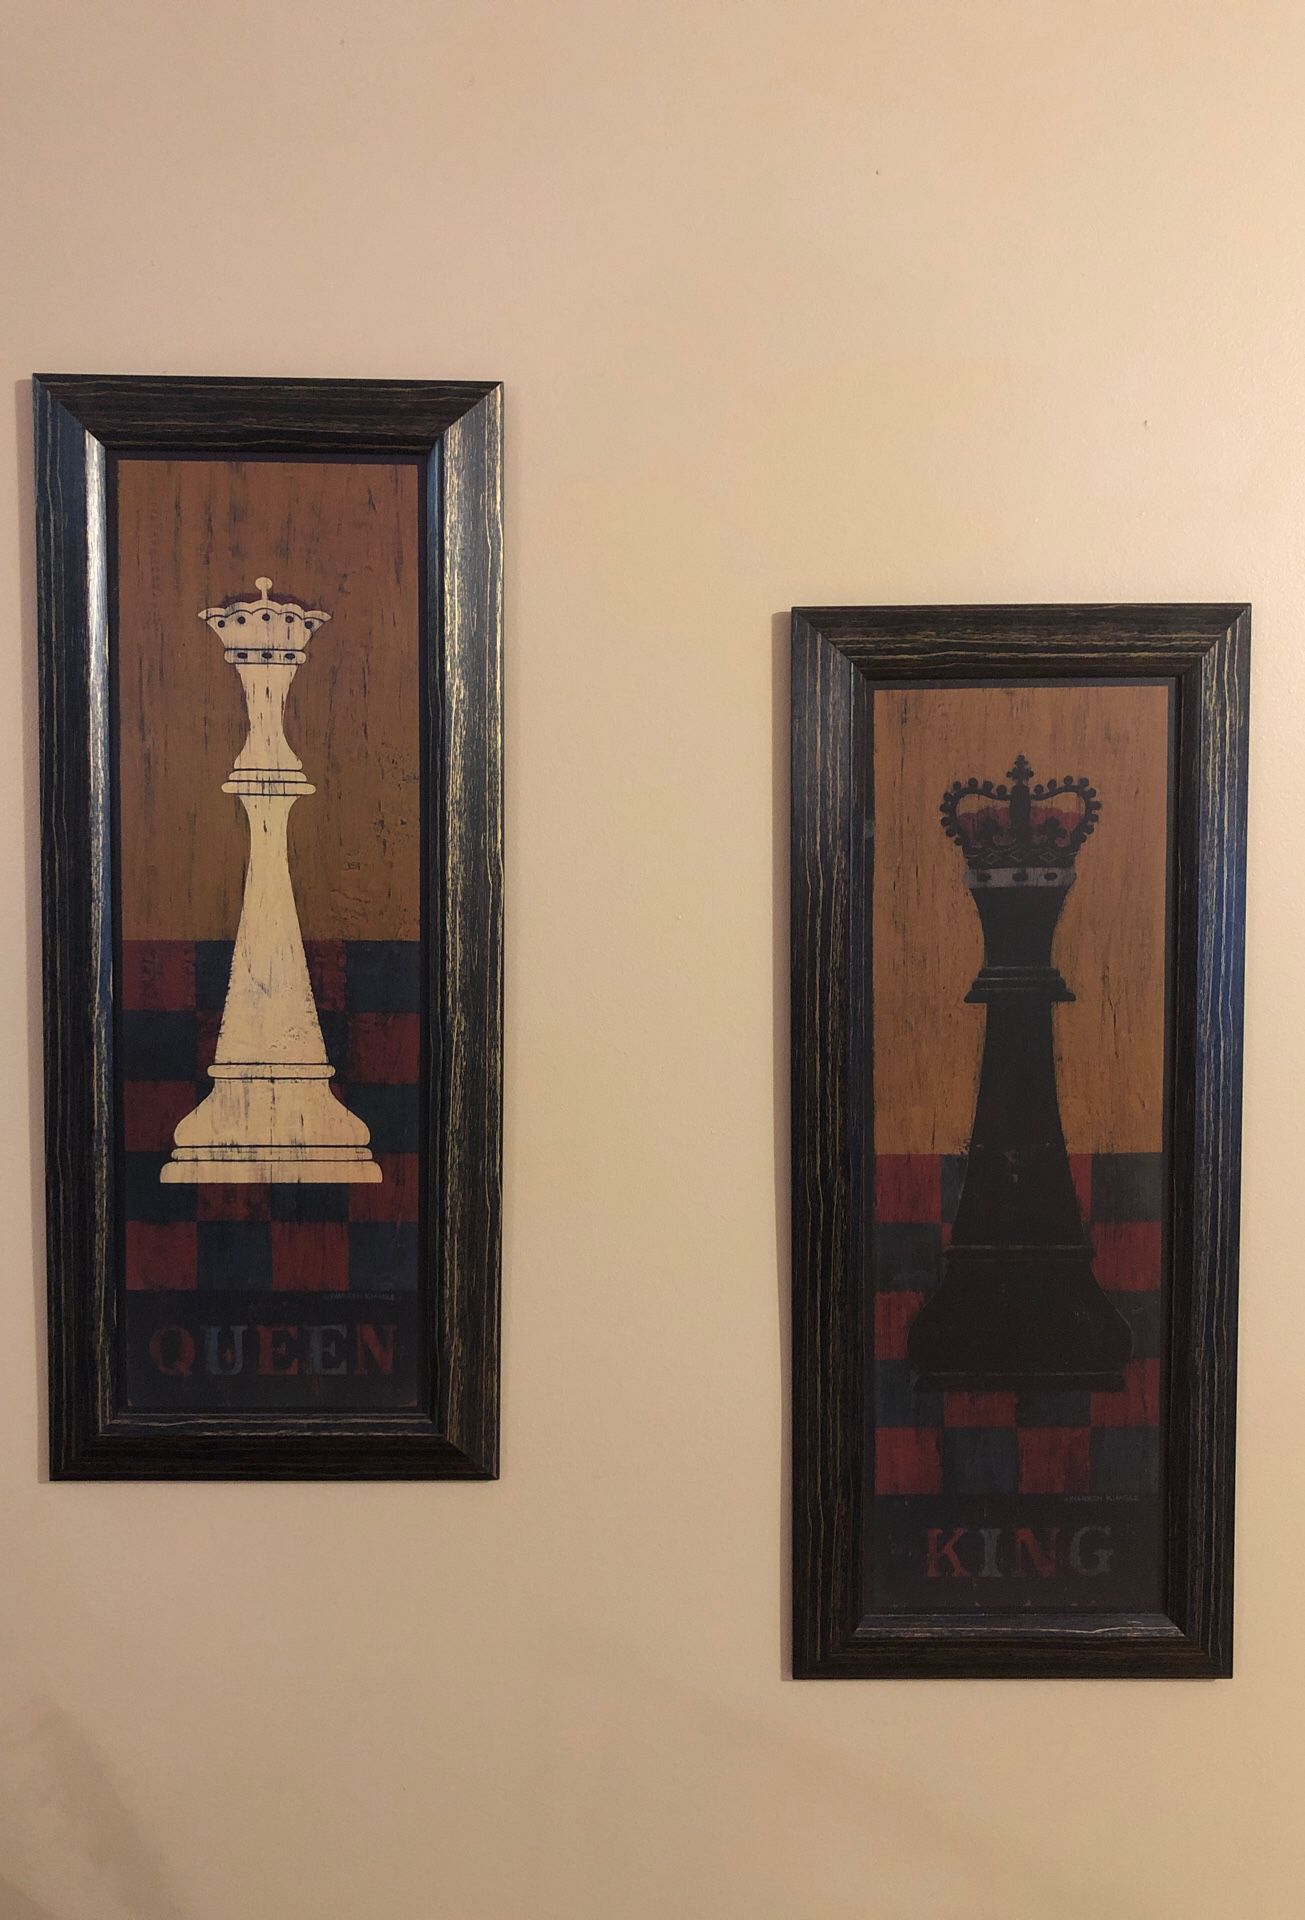 King and Queen wooden pics. 5$ must sell